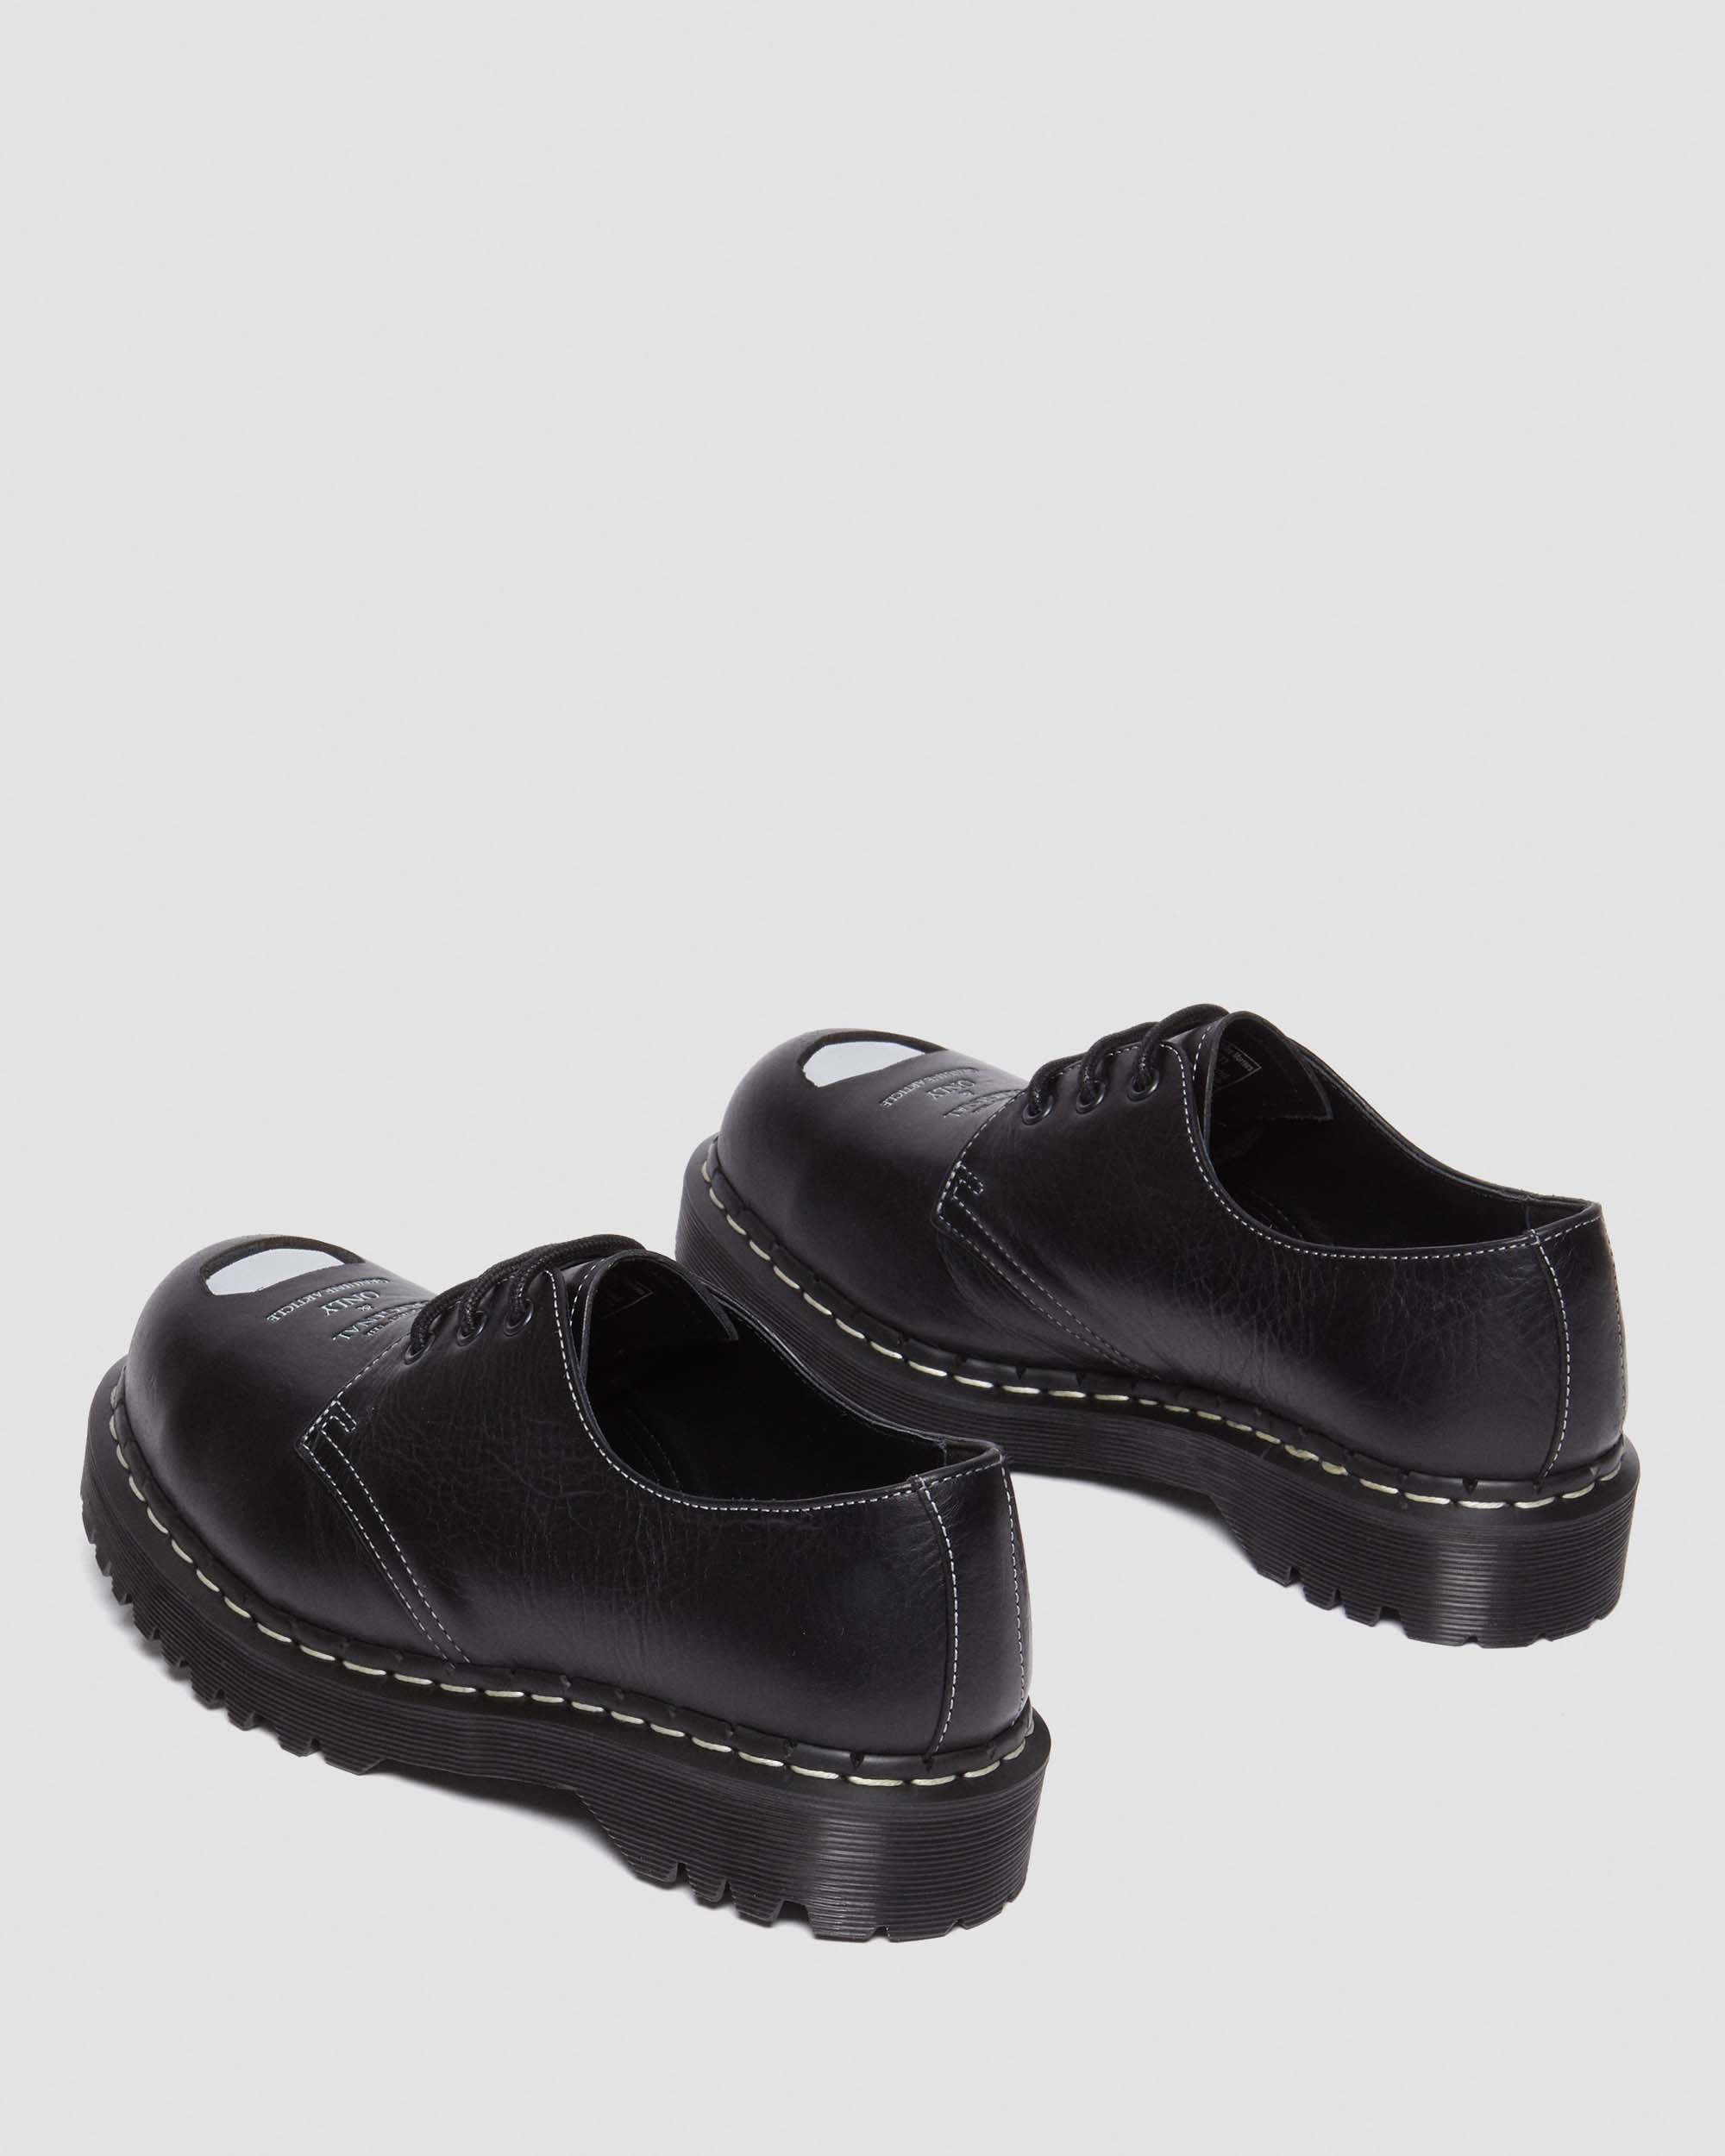 1461 Bex Steel Toe Leather Oxford Shoes in Black